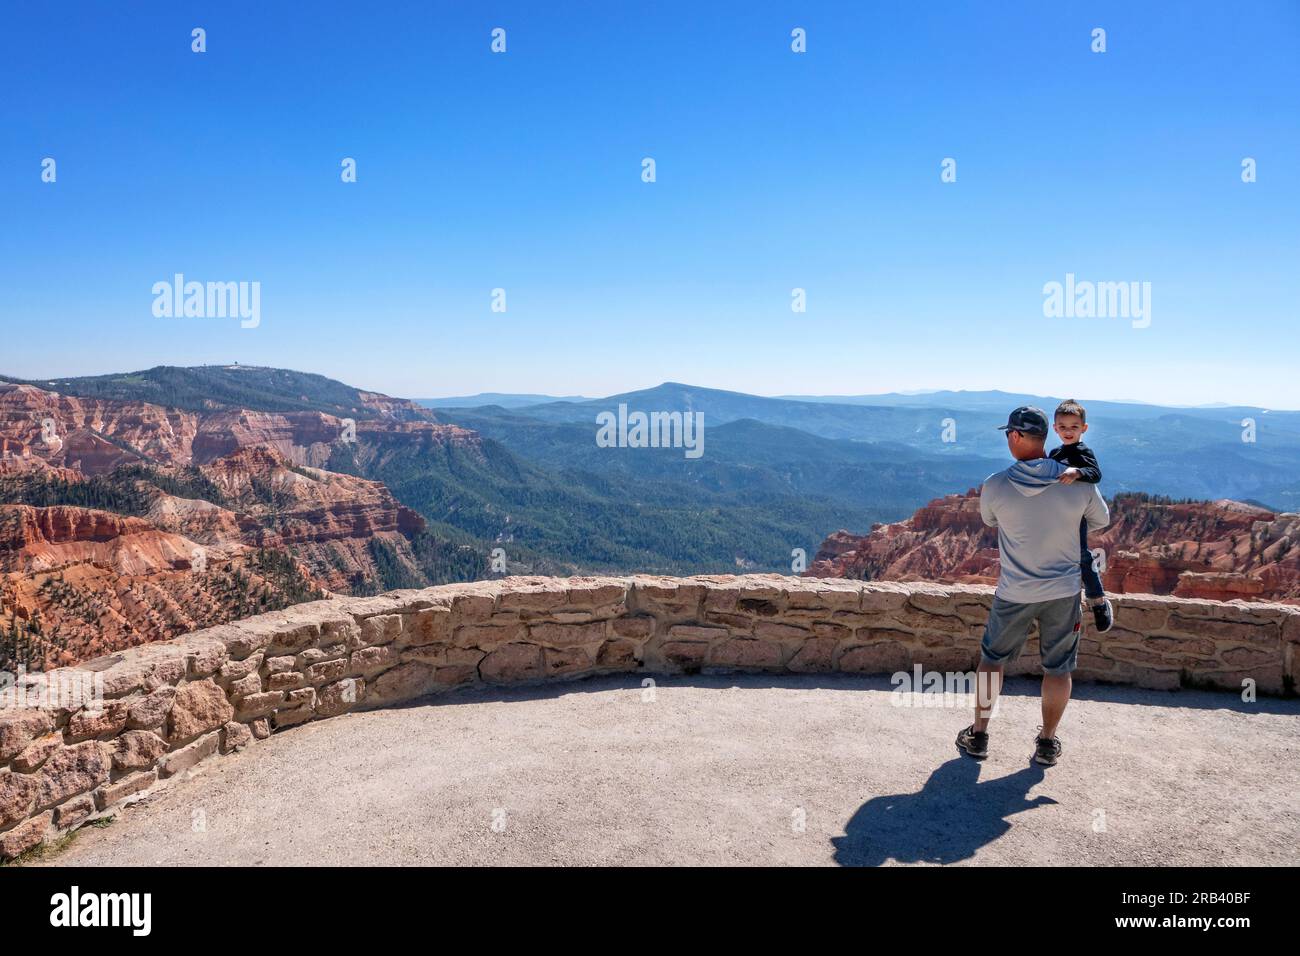 Views from Rim Road Highway 148 in Cedar Breaks National Monument Utah USA. Father and son at scenic overlook Stock Photo